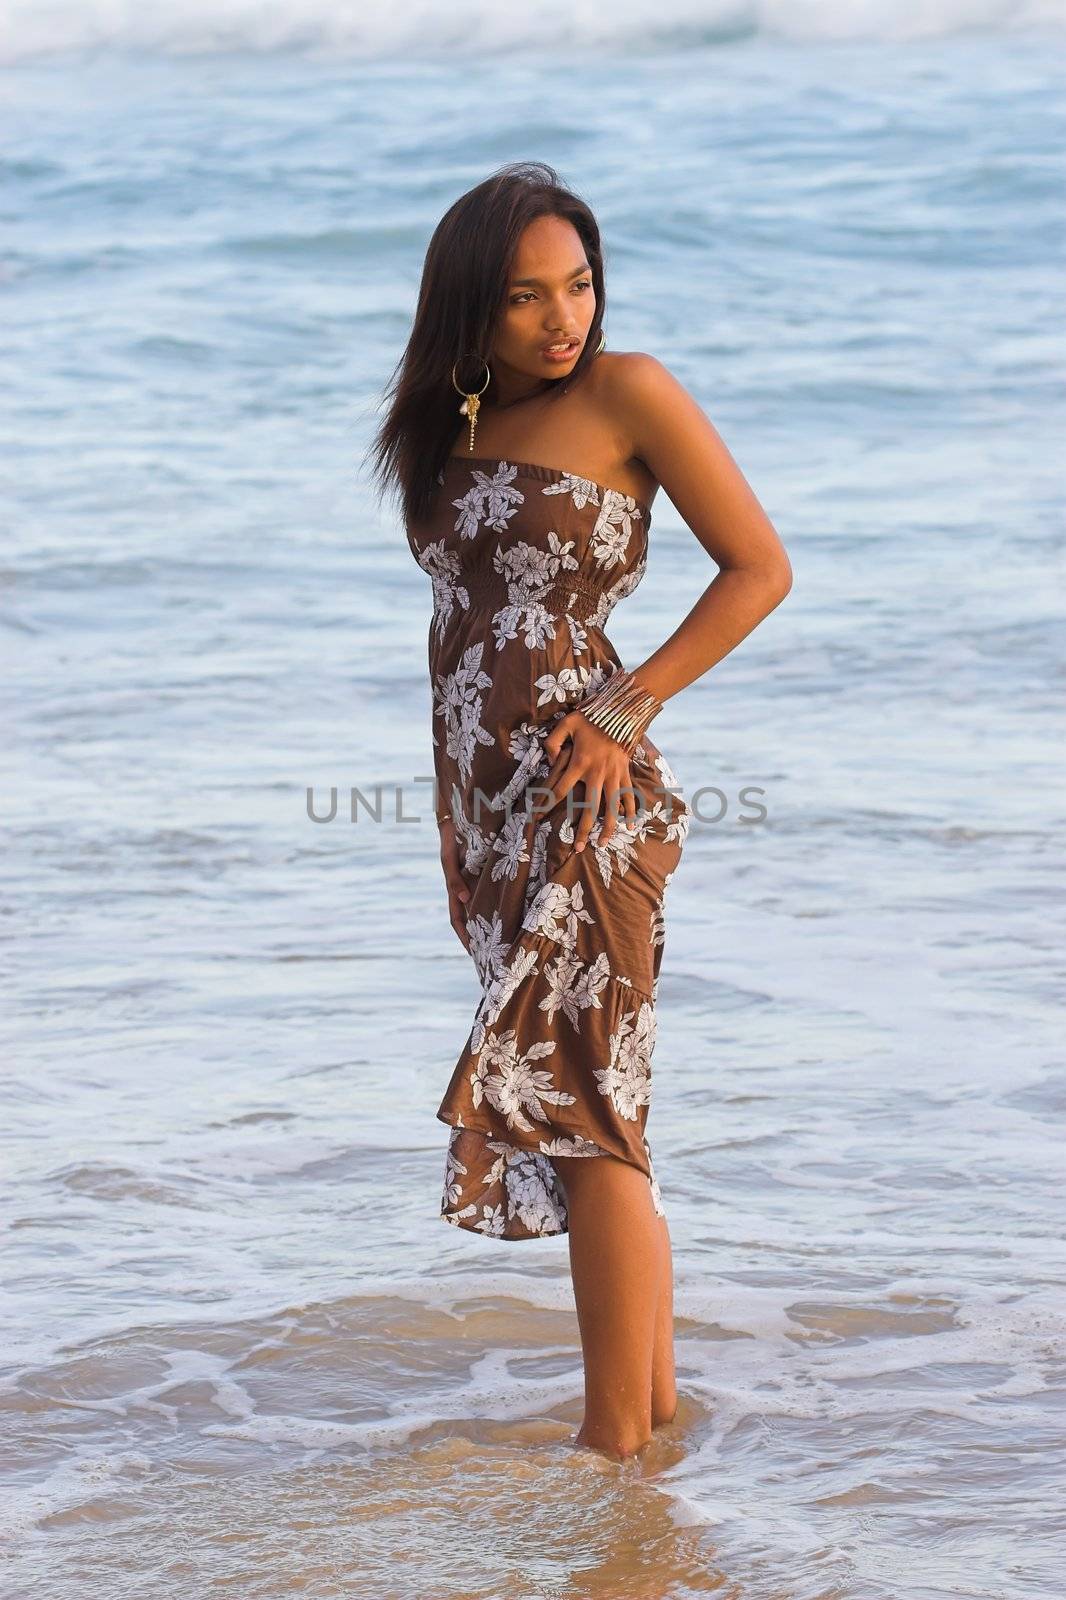 Caribbean model standing in the water at the beach